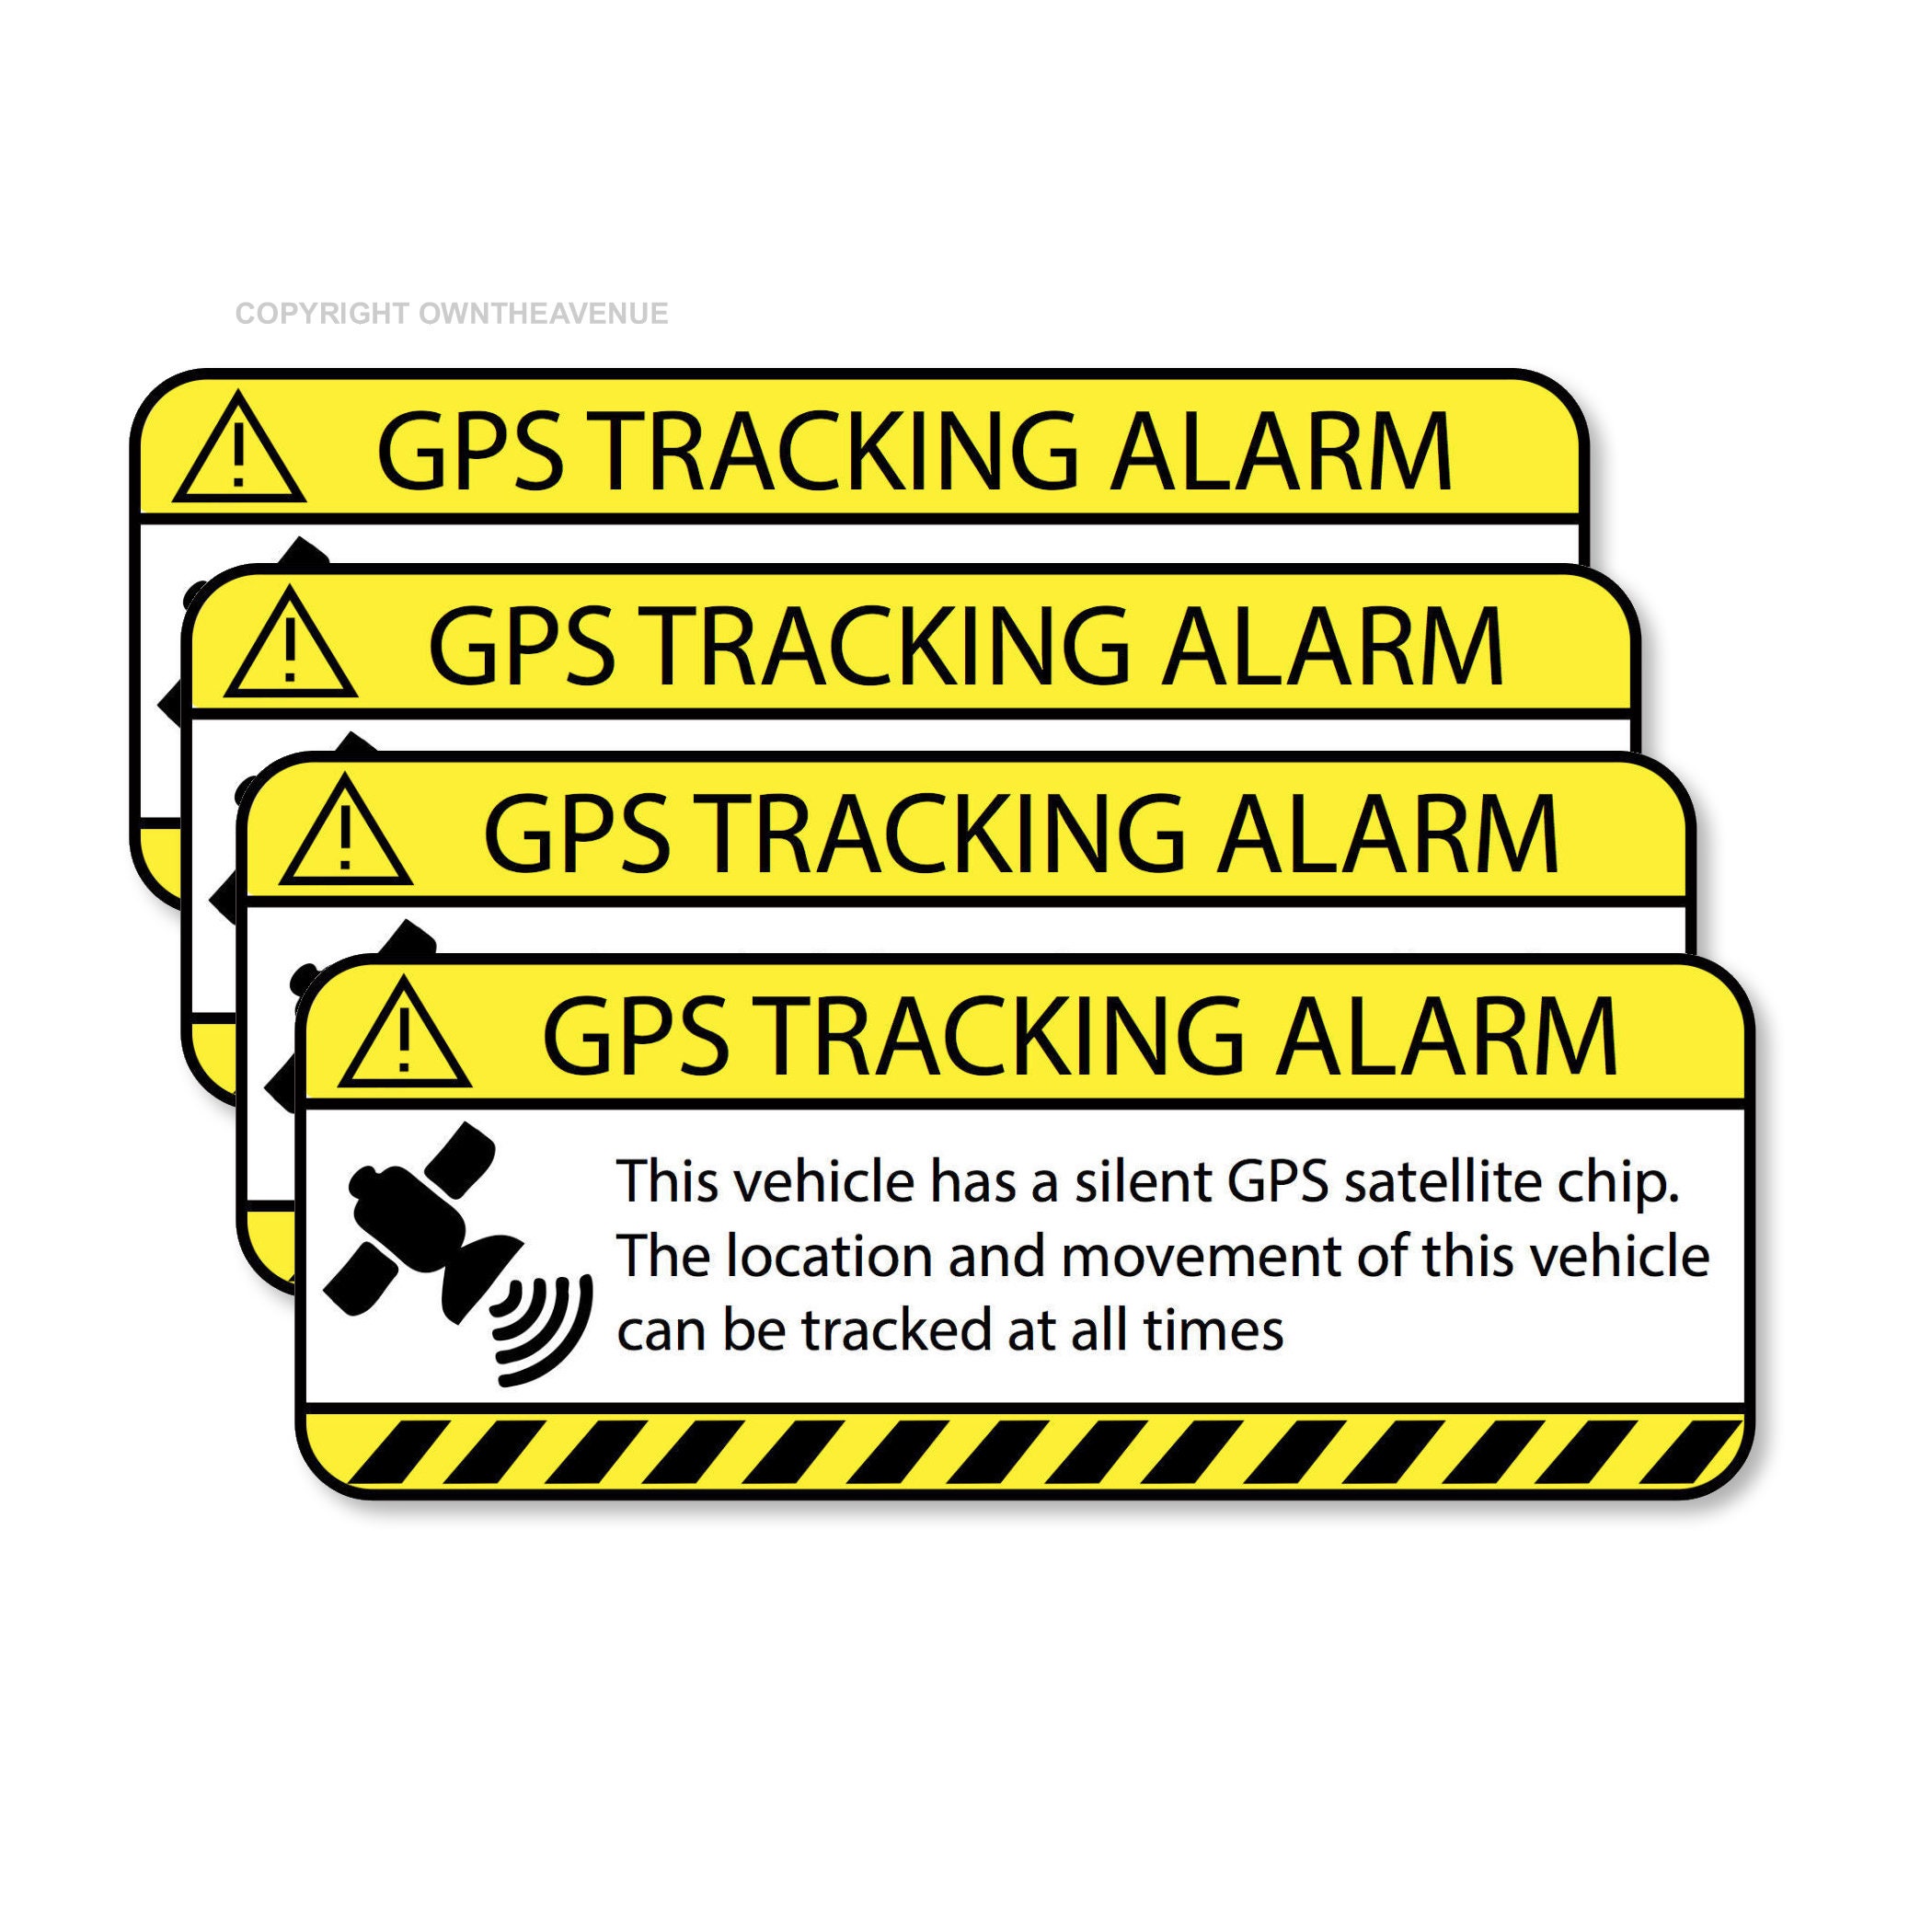 Totomo (Set of 8) Anti-Theft Car Vehicle Stickers with GPS Tracking Warning - 3 inch x 1.5 inch Sign (4pc Sticker + 4pc Window Cling)